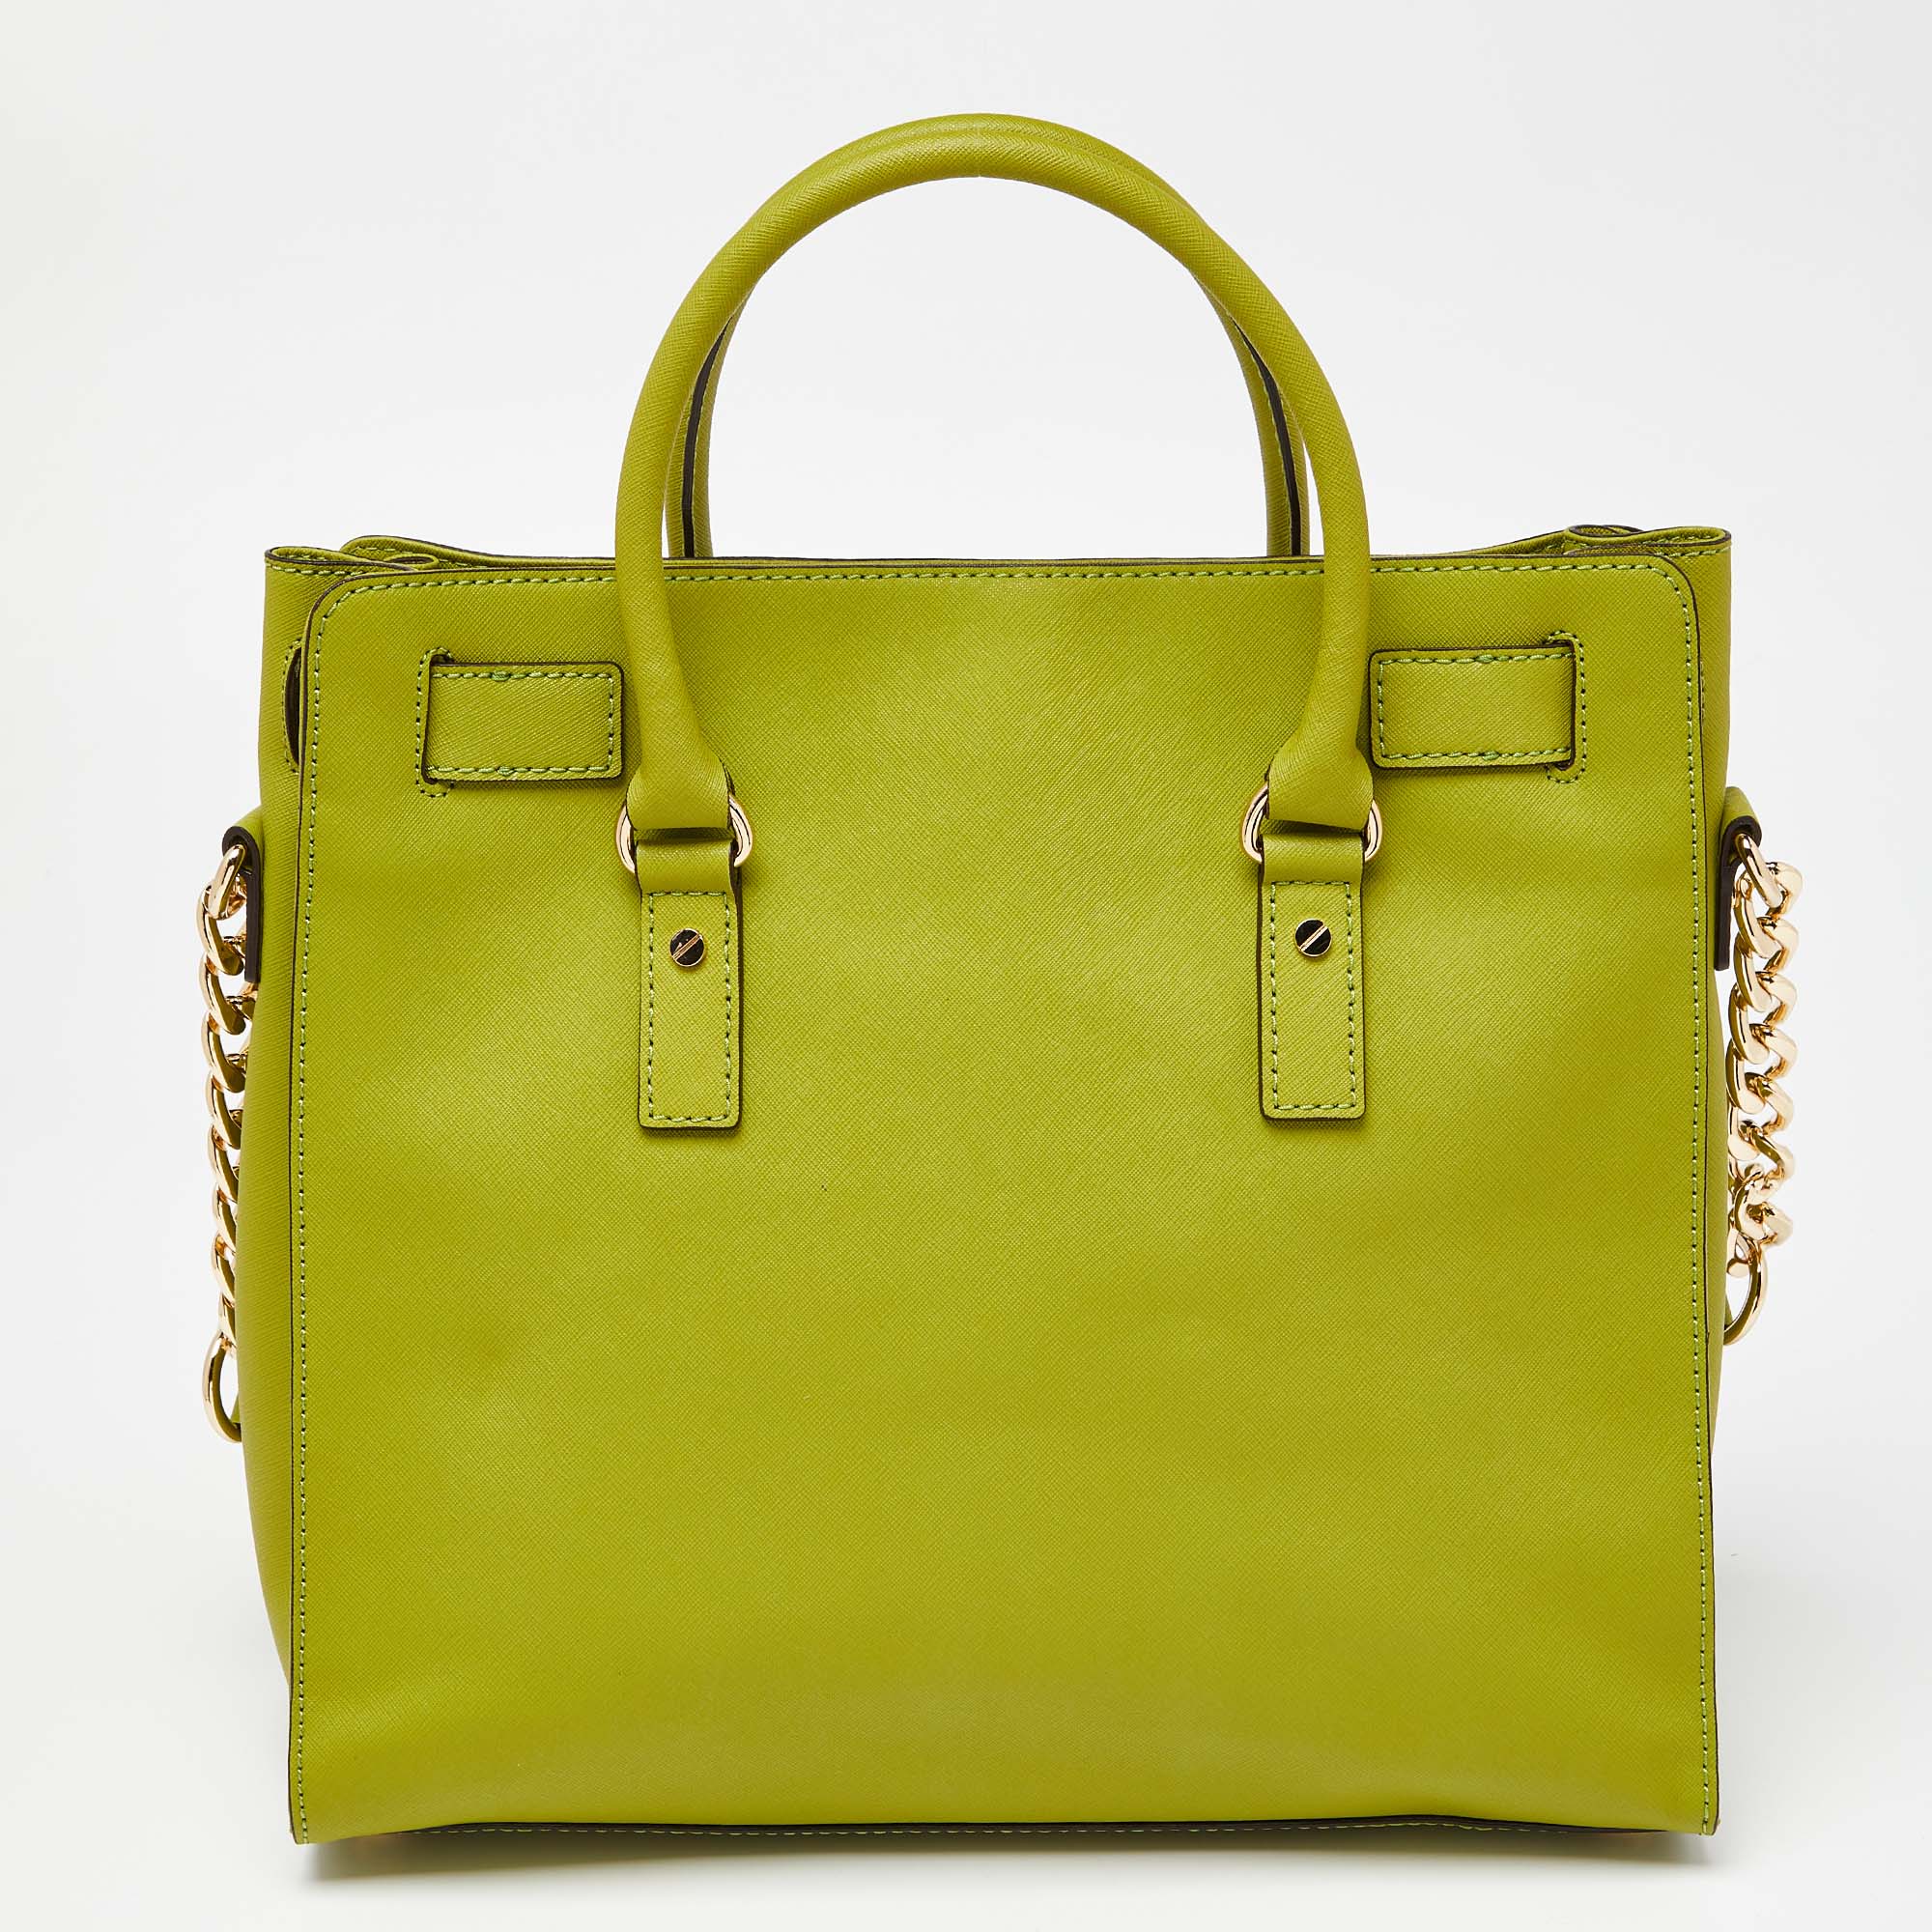 MICHAEL Michael Kors Green Leather Large Hamilton North South Tote With Wallet